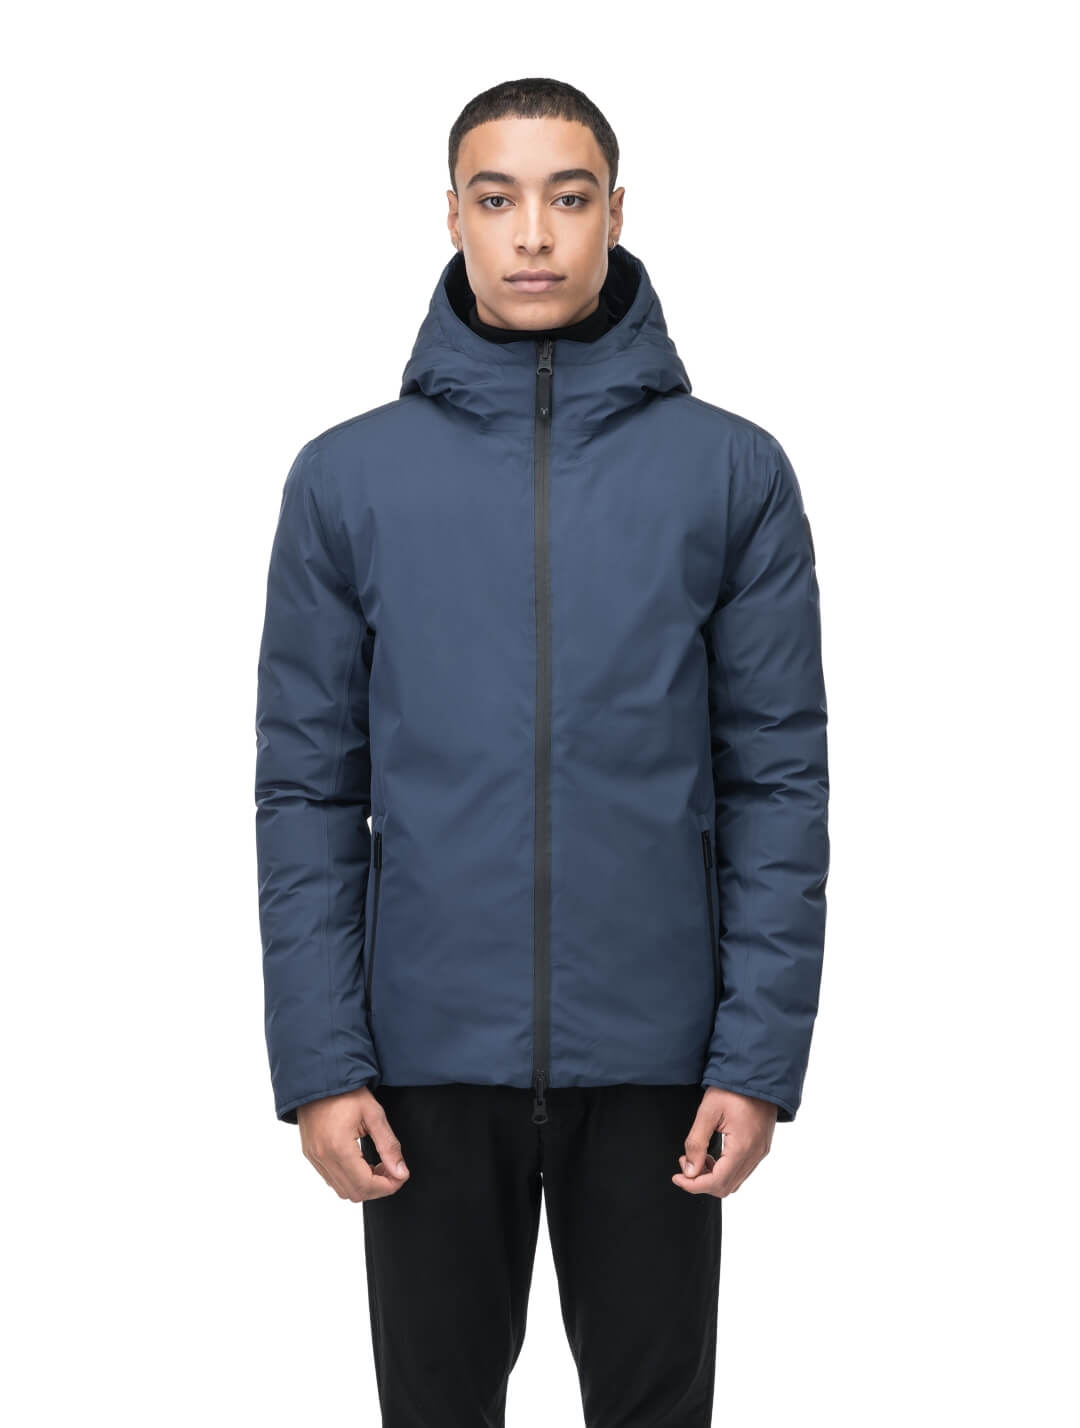 Chris Men's Mid Weight Reversible Puffer Jacket in hip length, Canadian duck down insulation, non-removable adjustable hood, ribbed cuffs, and quilted body on reversible side, in Marine